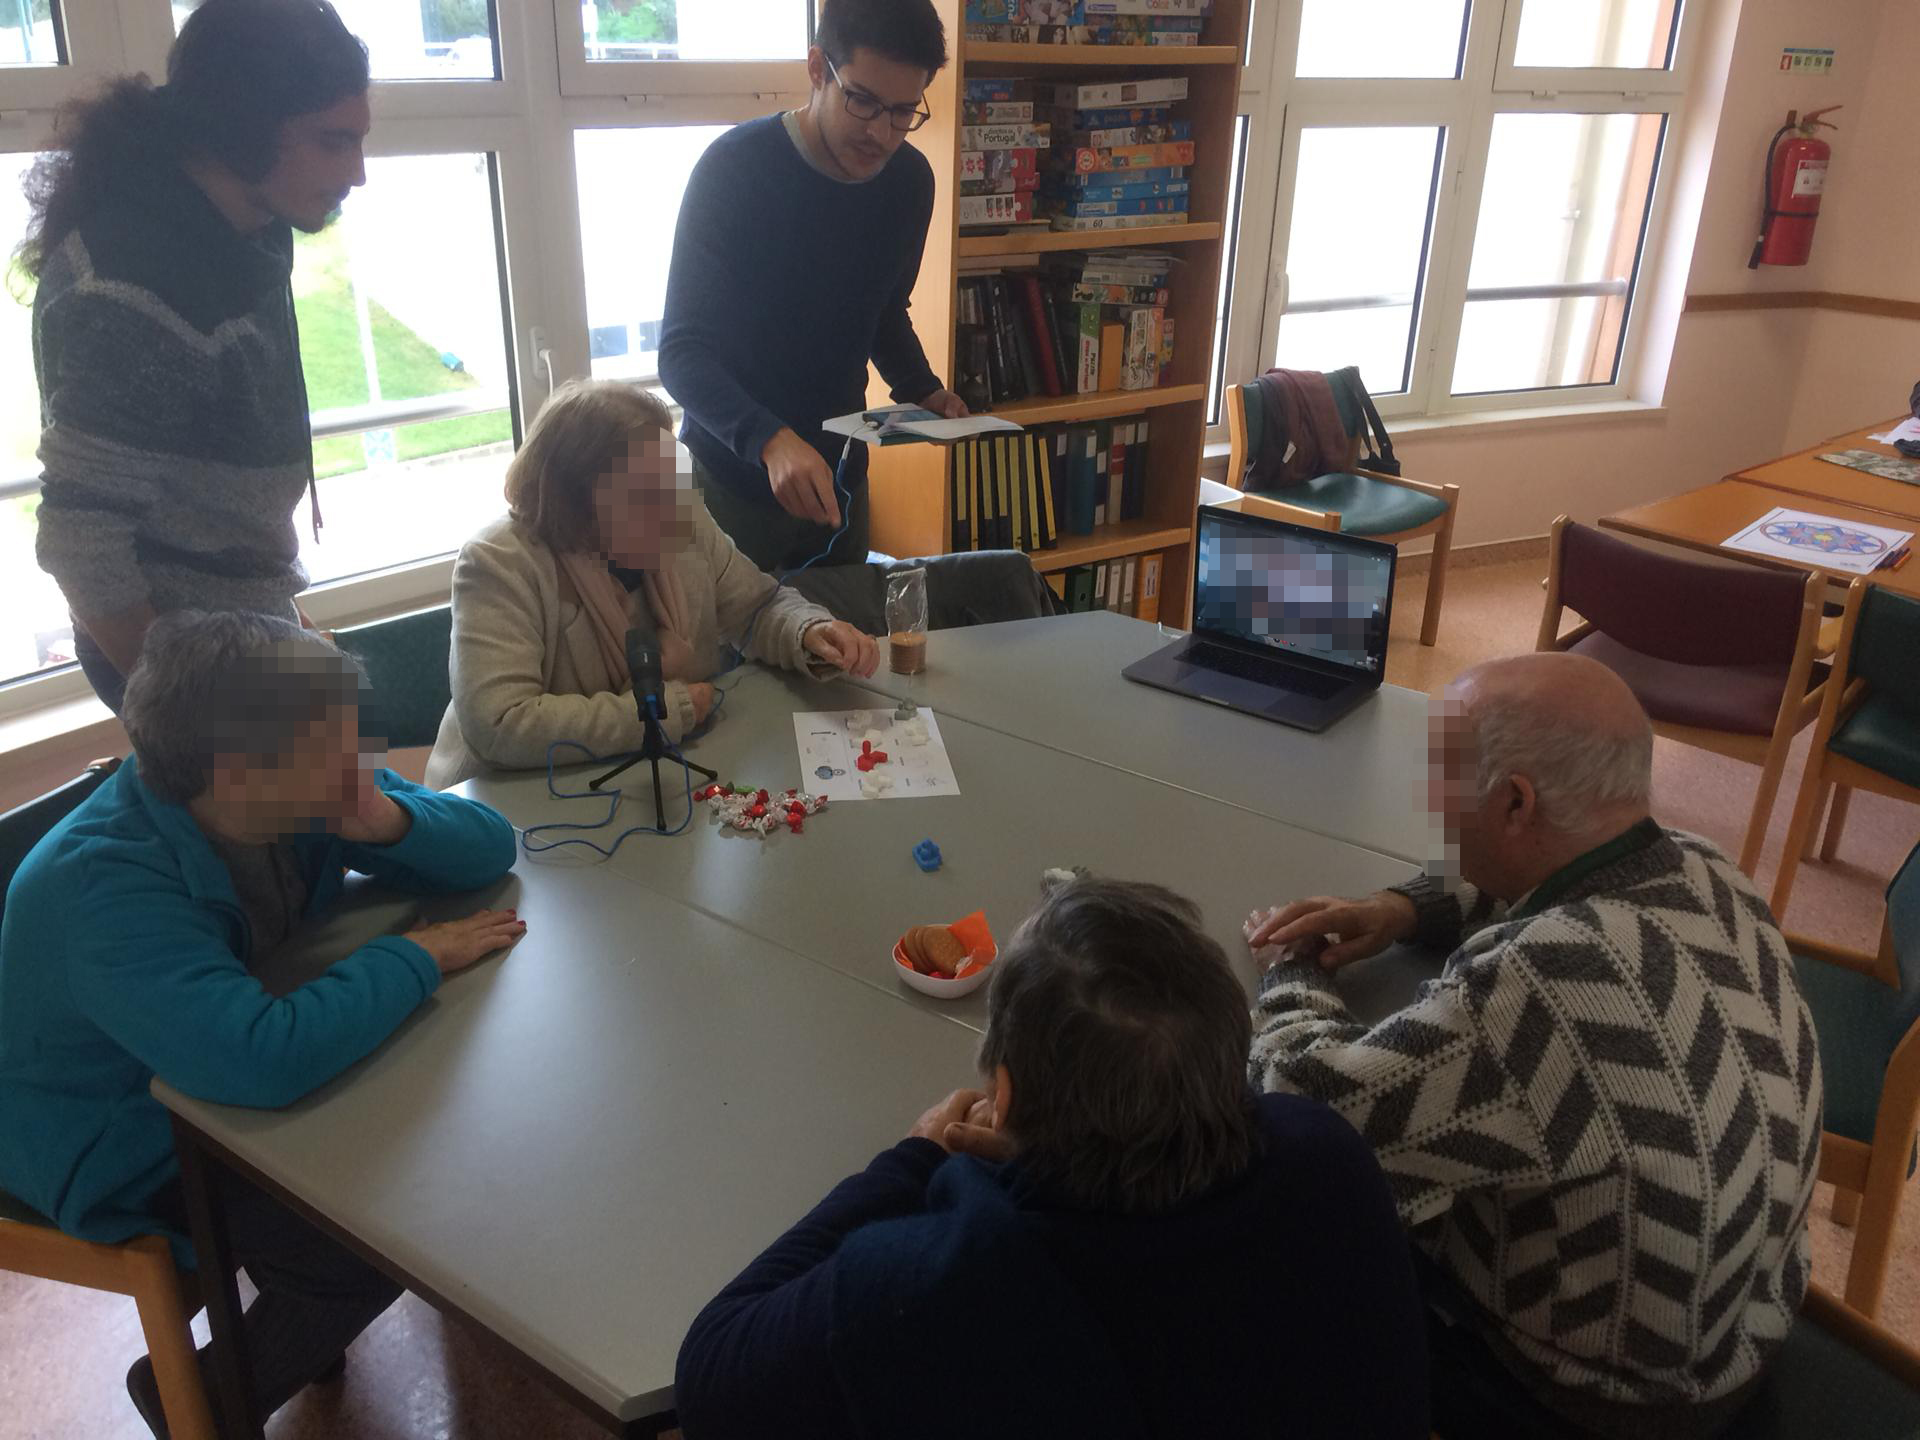 Photo taken from the Workshop with elderly people. Two people are interacting with the carrier robot